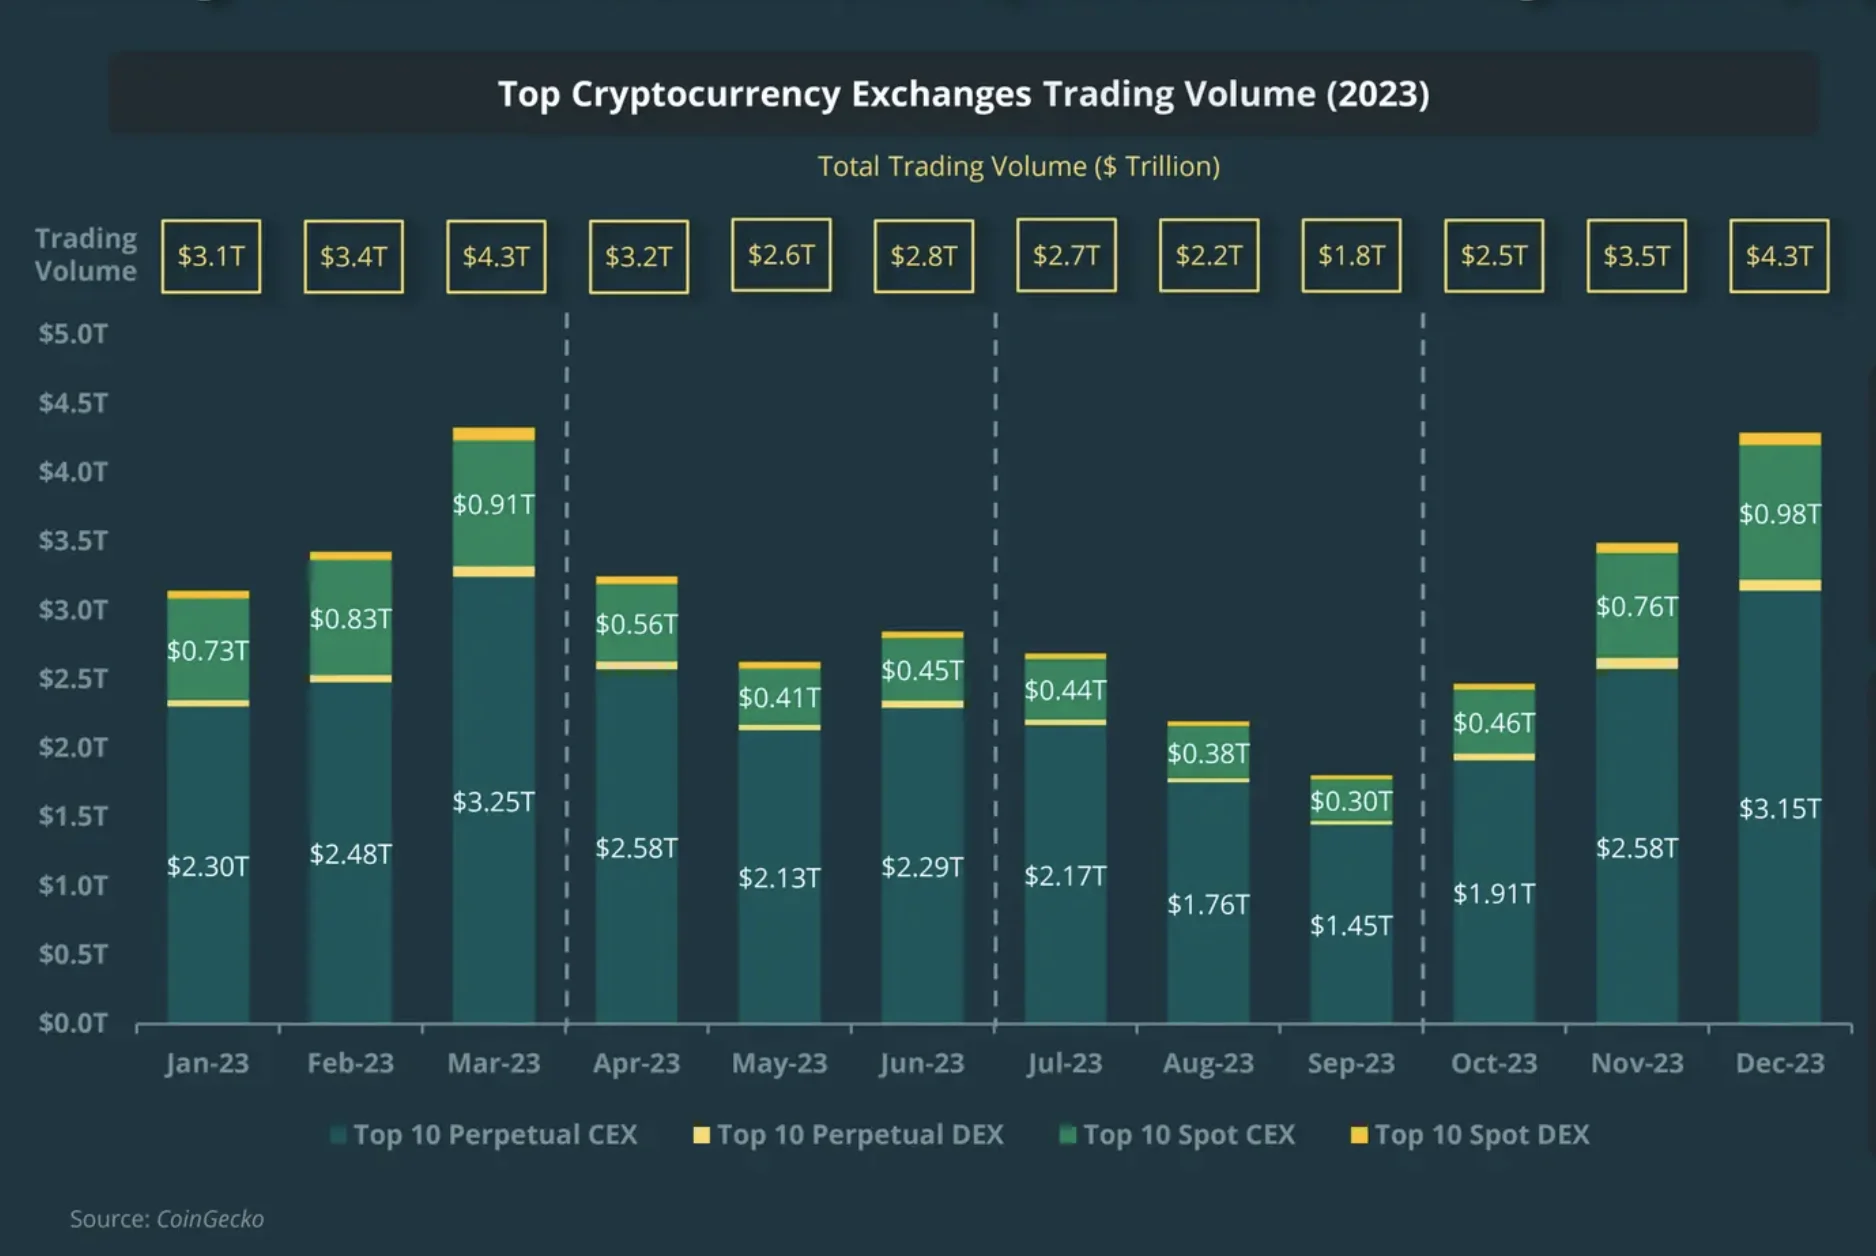 Top Crypto Exchanges Trading Volumes in 2023 